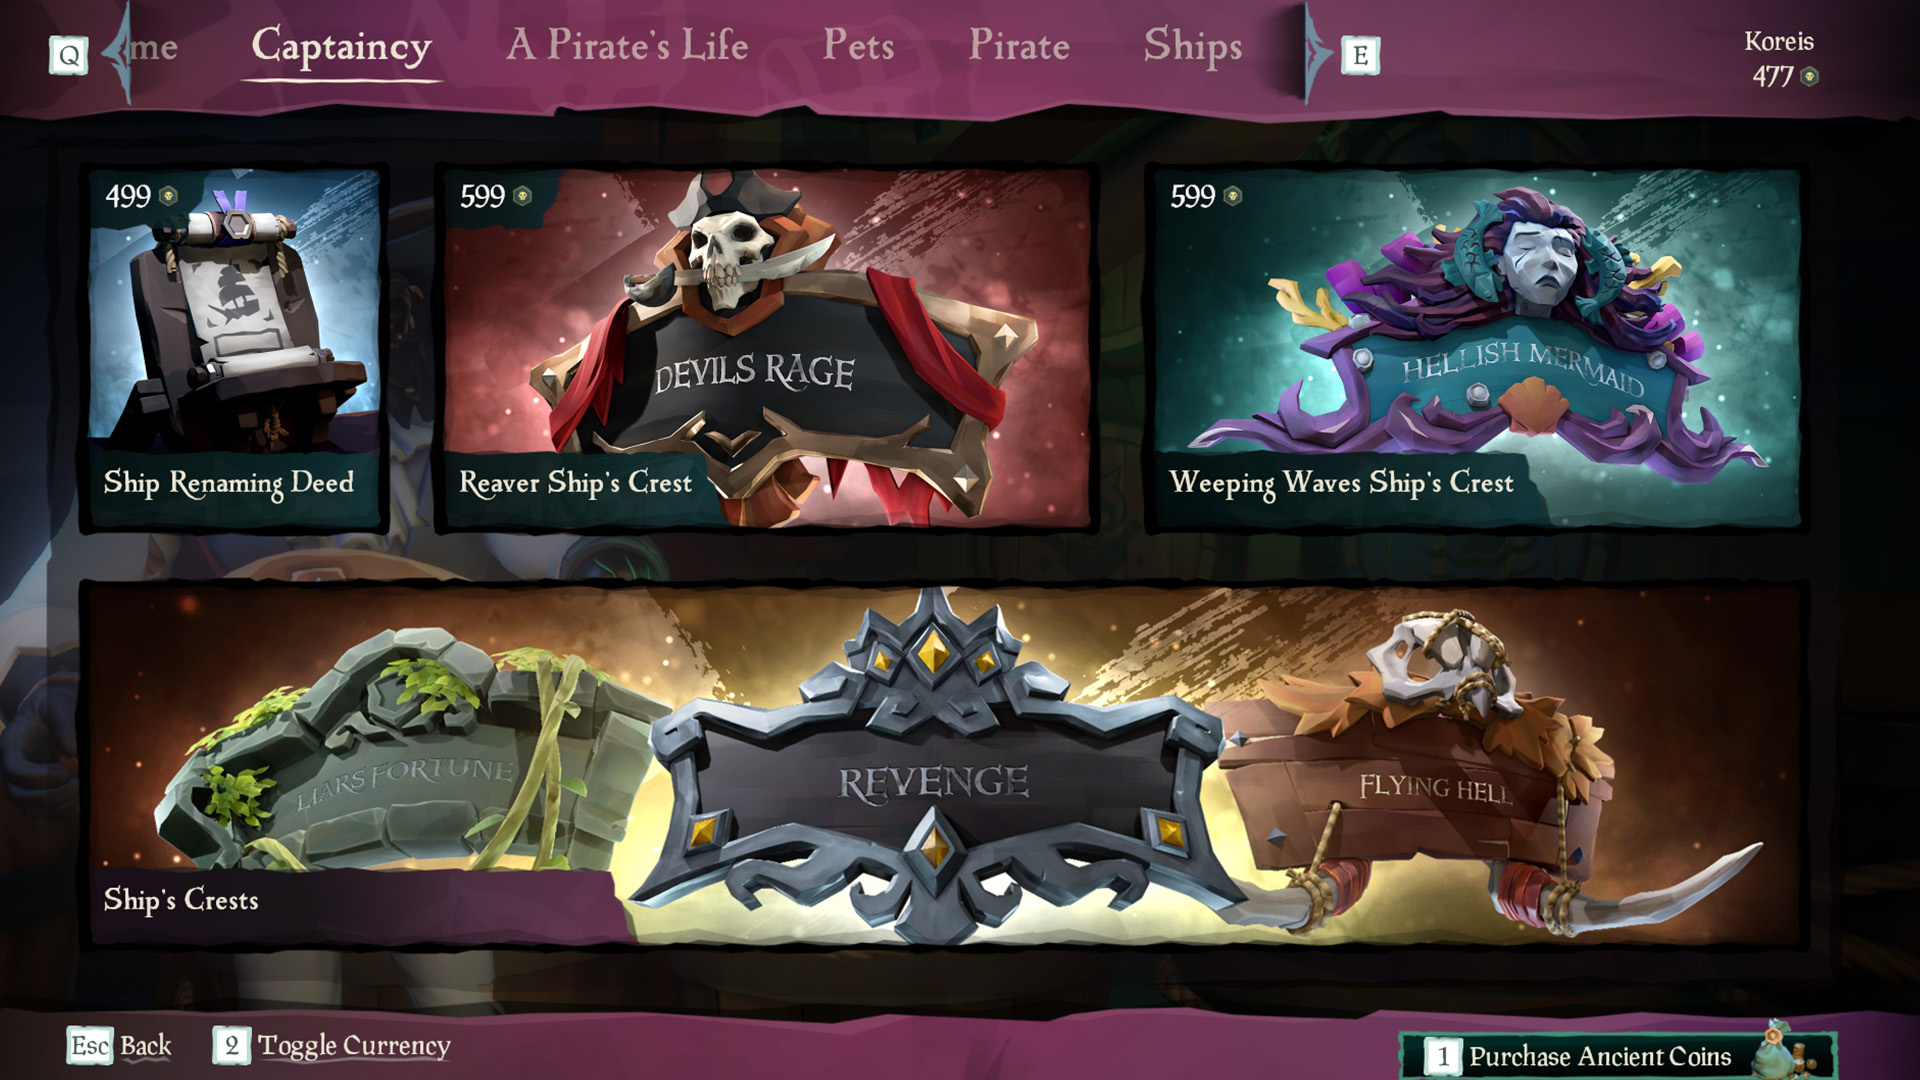 The purple framed text menu for the emporium advertises ship cosmetics in Sea of Thieves